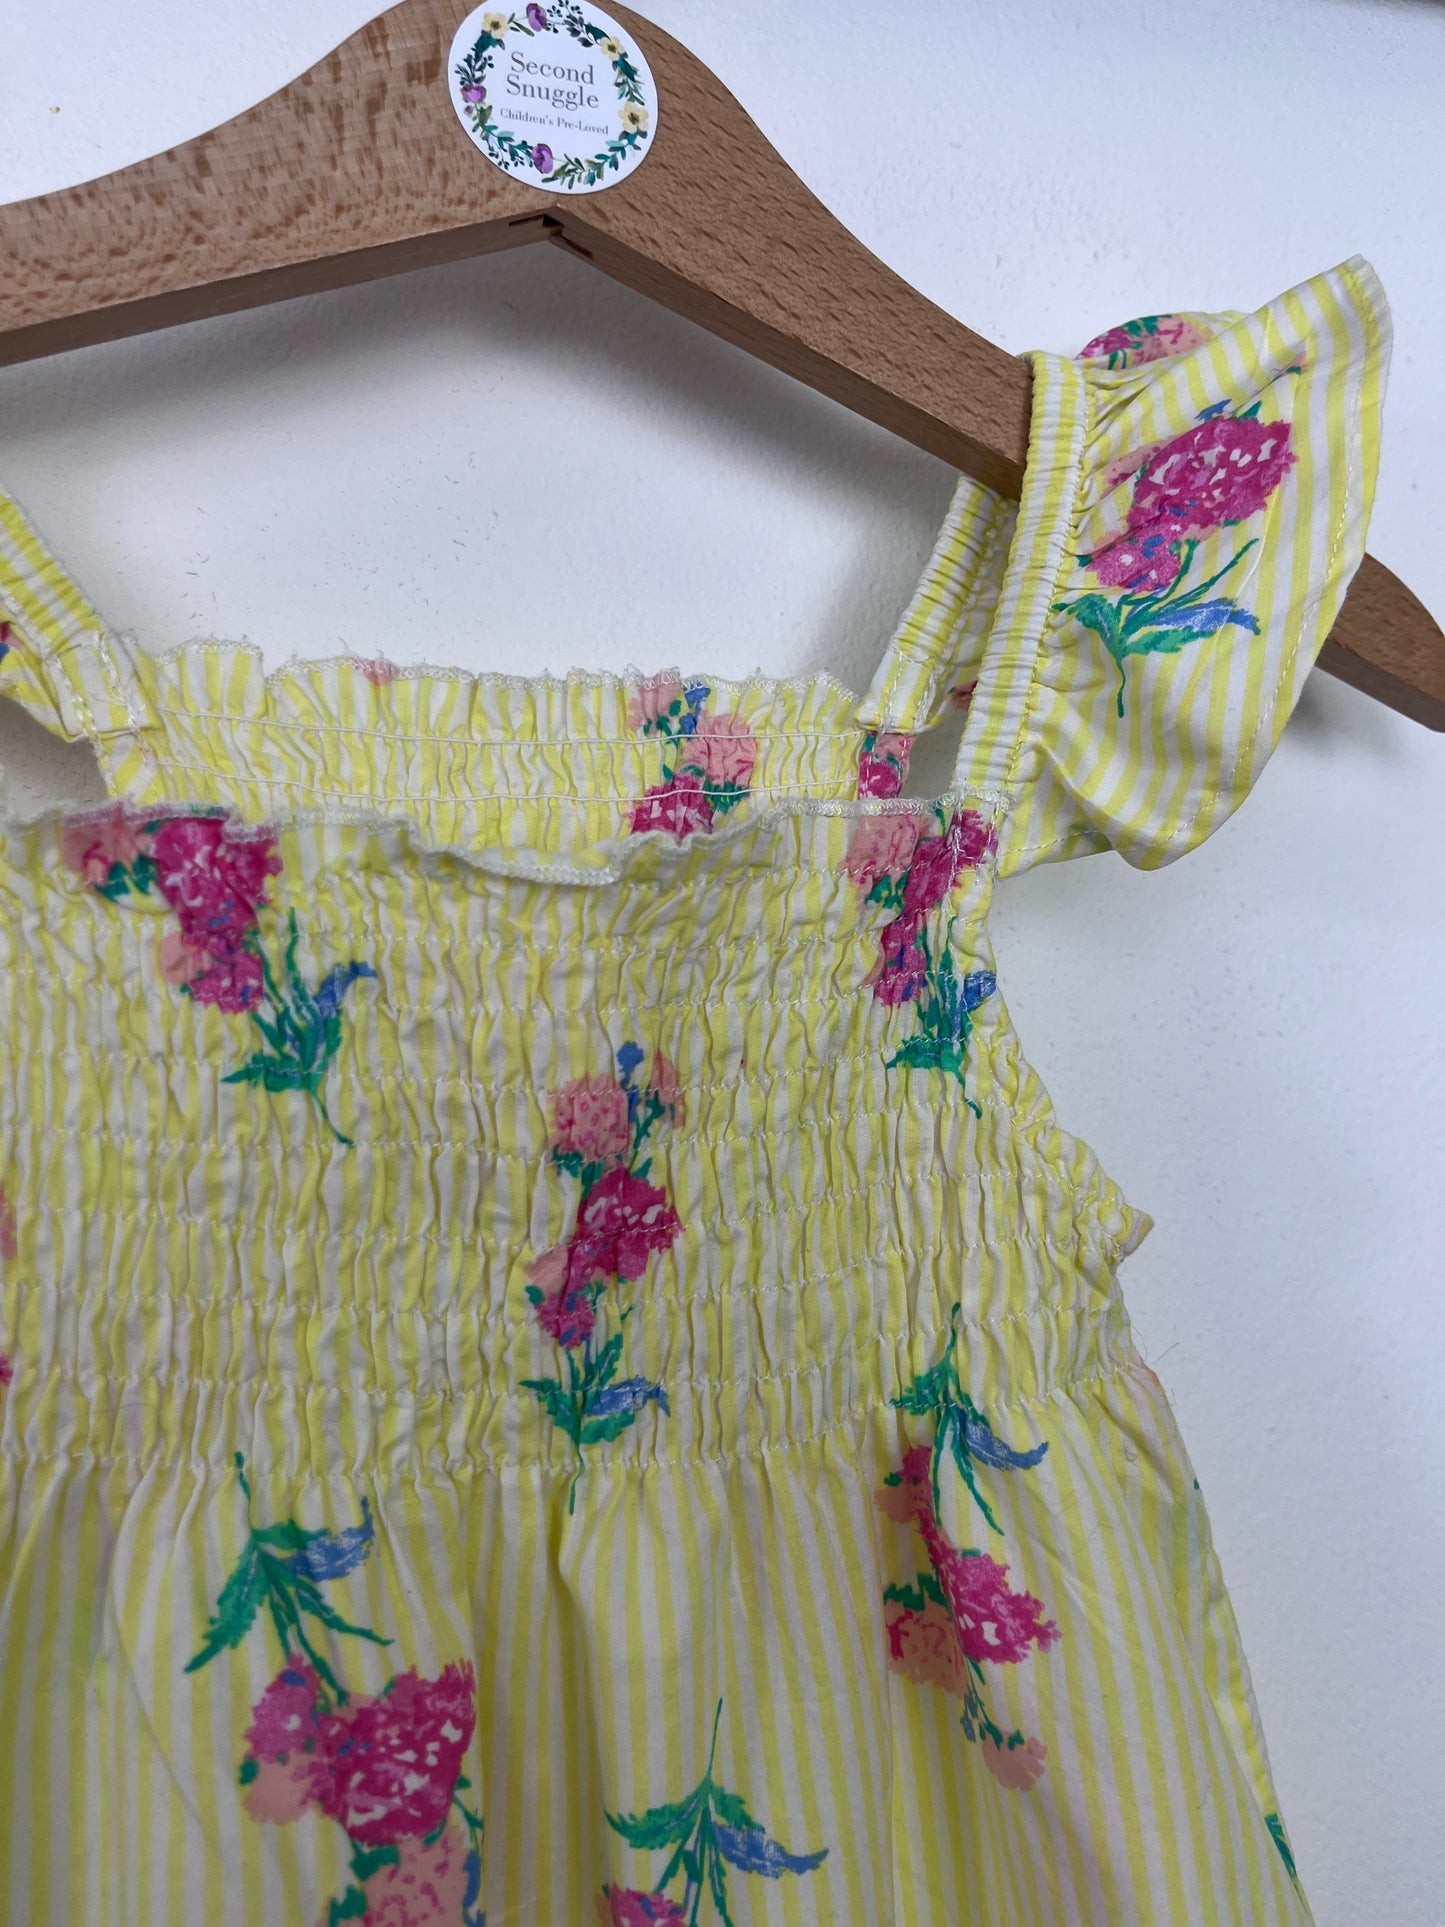 Joules 6-9 Months-Rompers-Second Snuggle Preloved